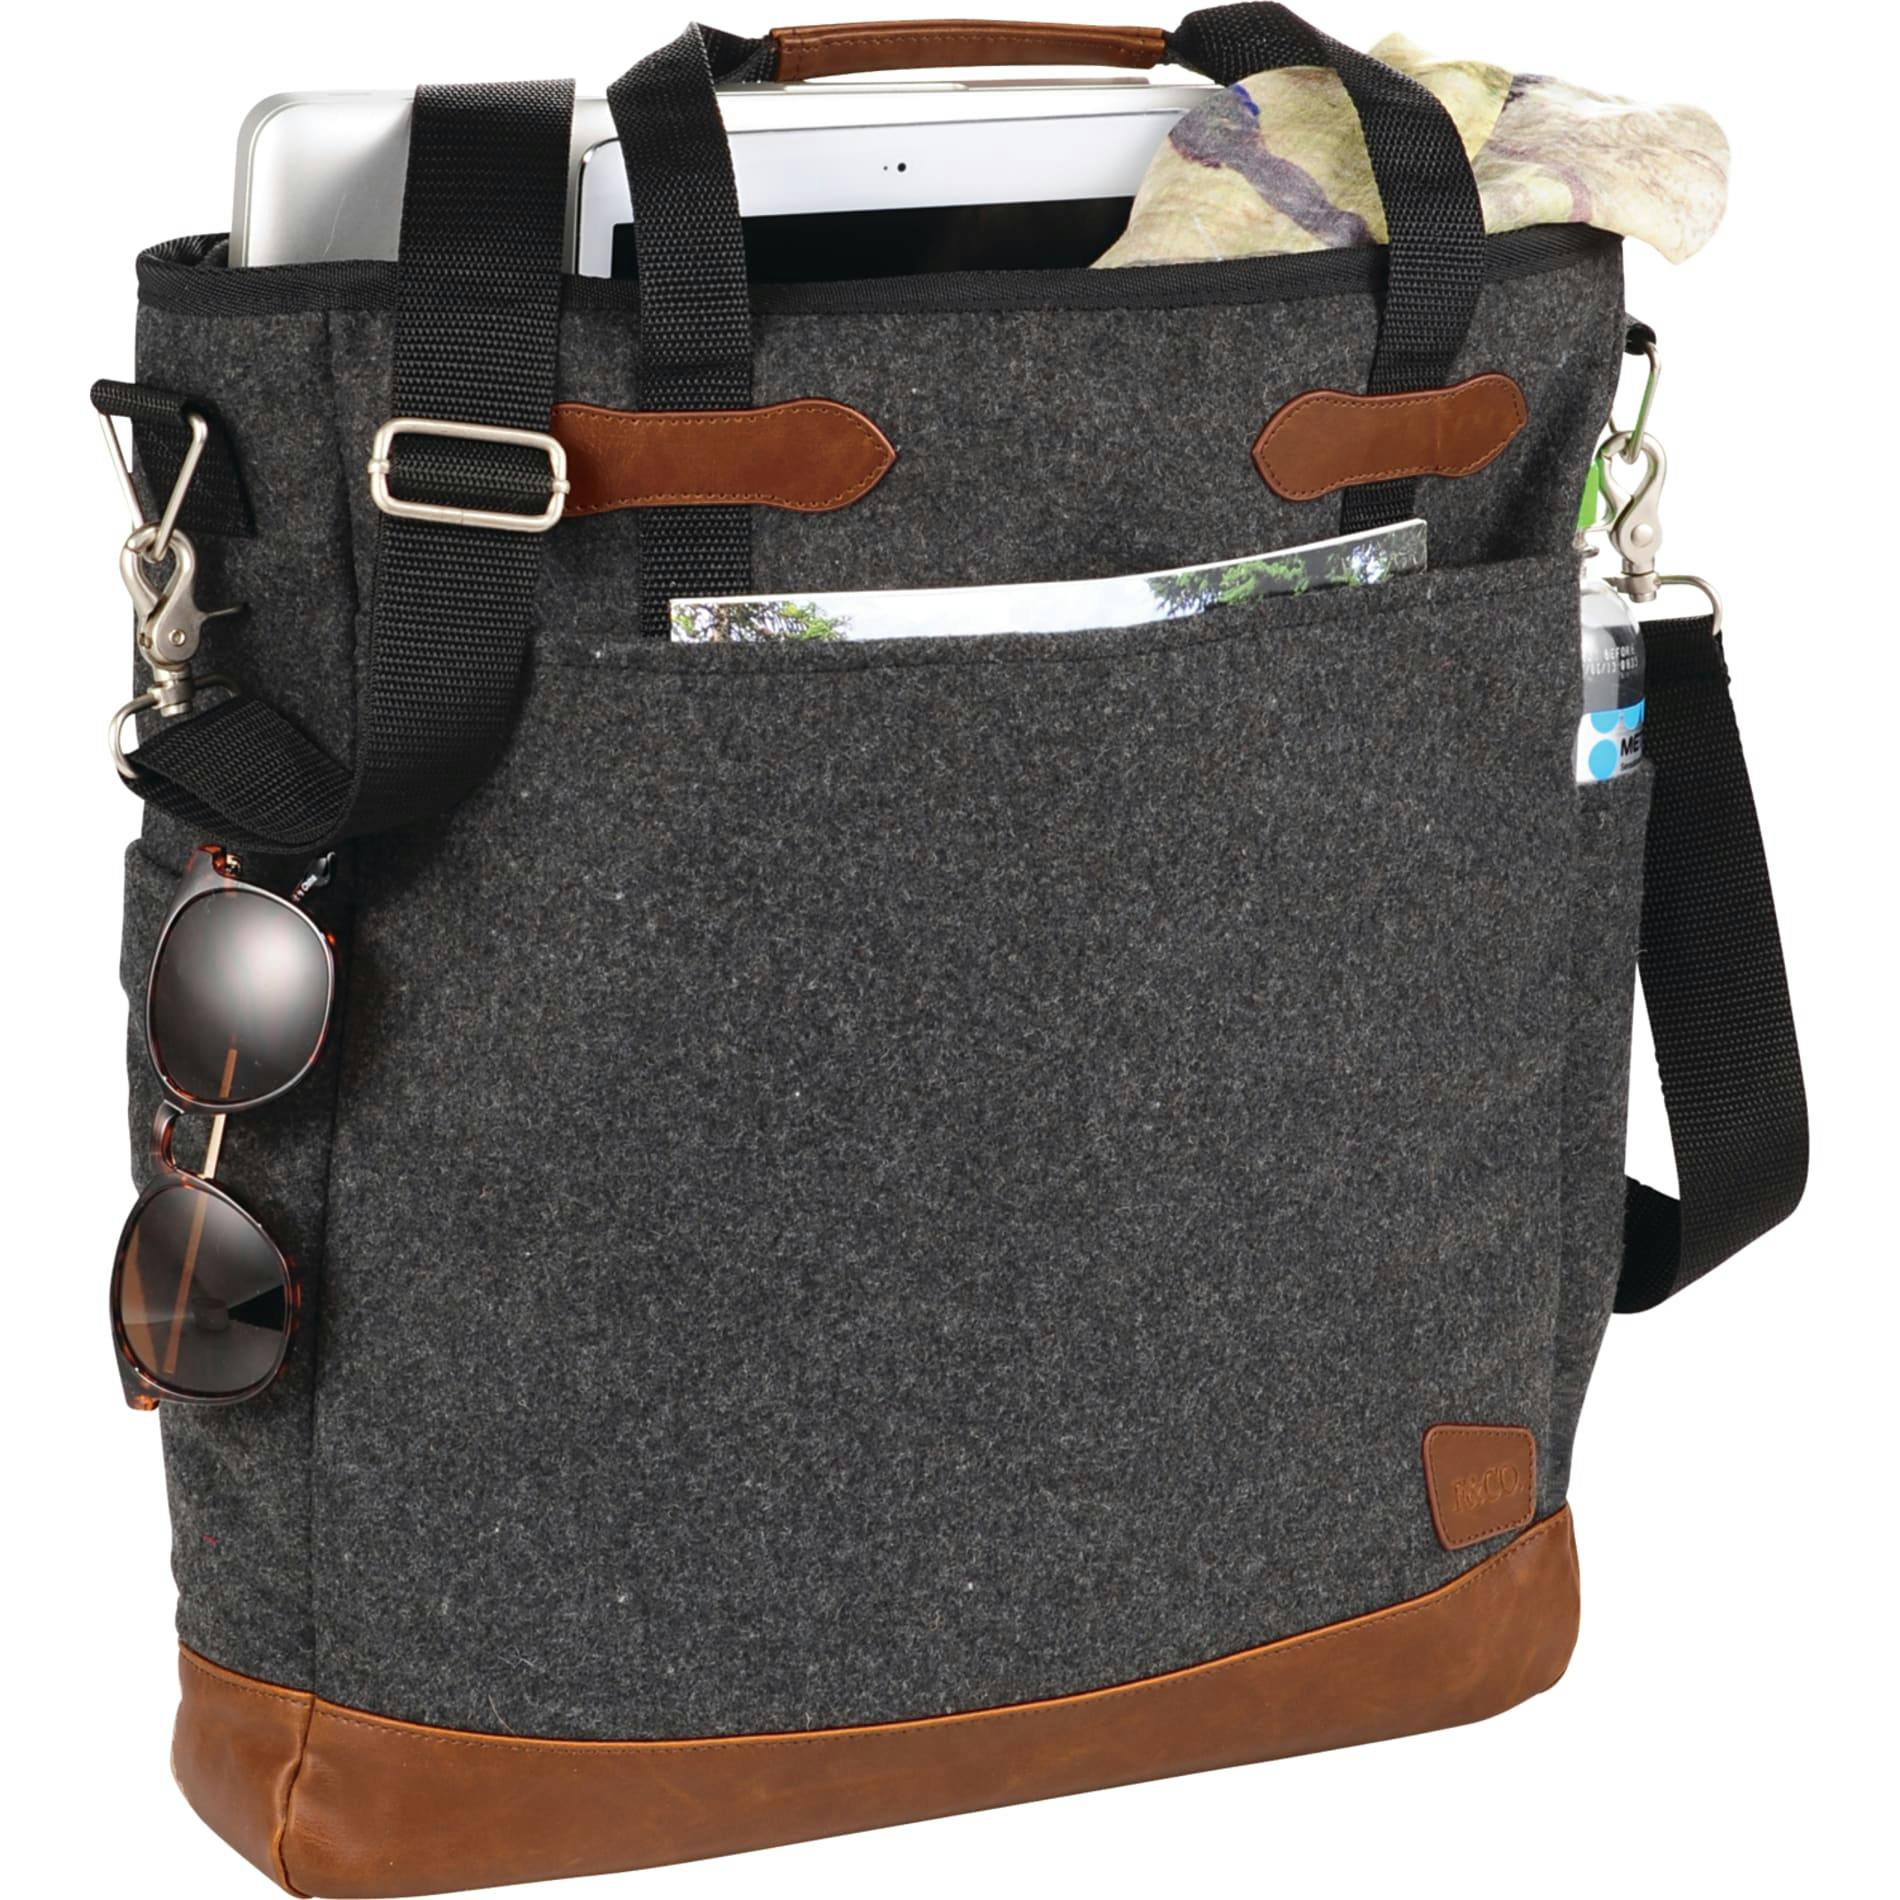 Field & Co.® Campster Wool 15" Computer Tote - additional Image 3